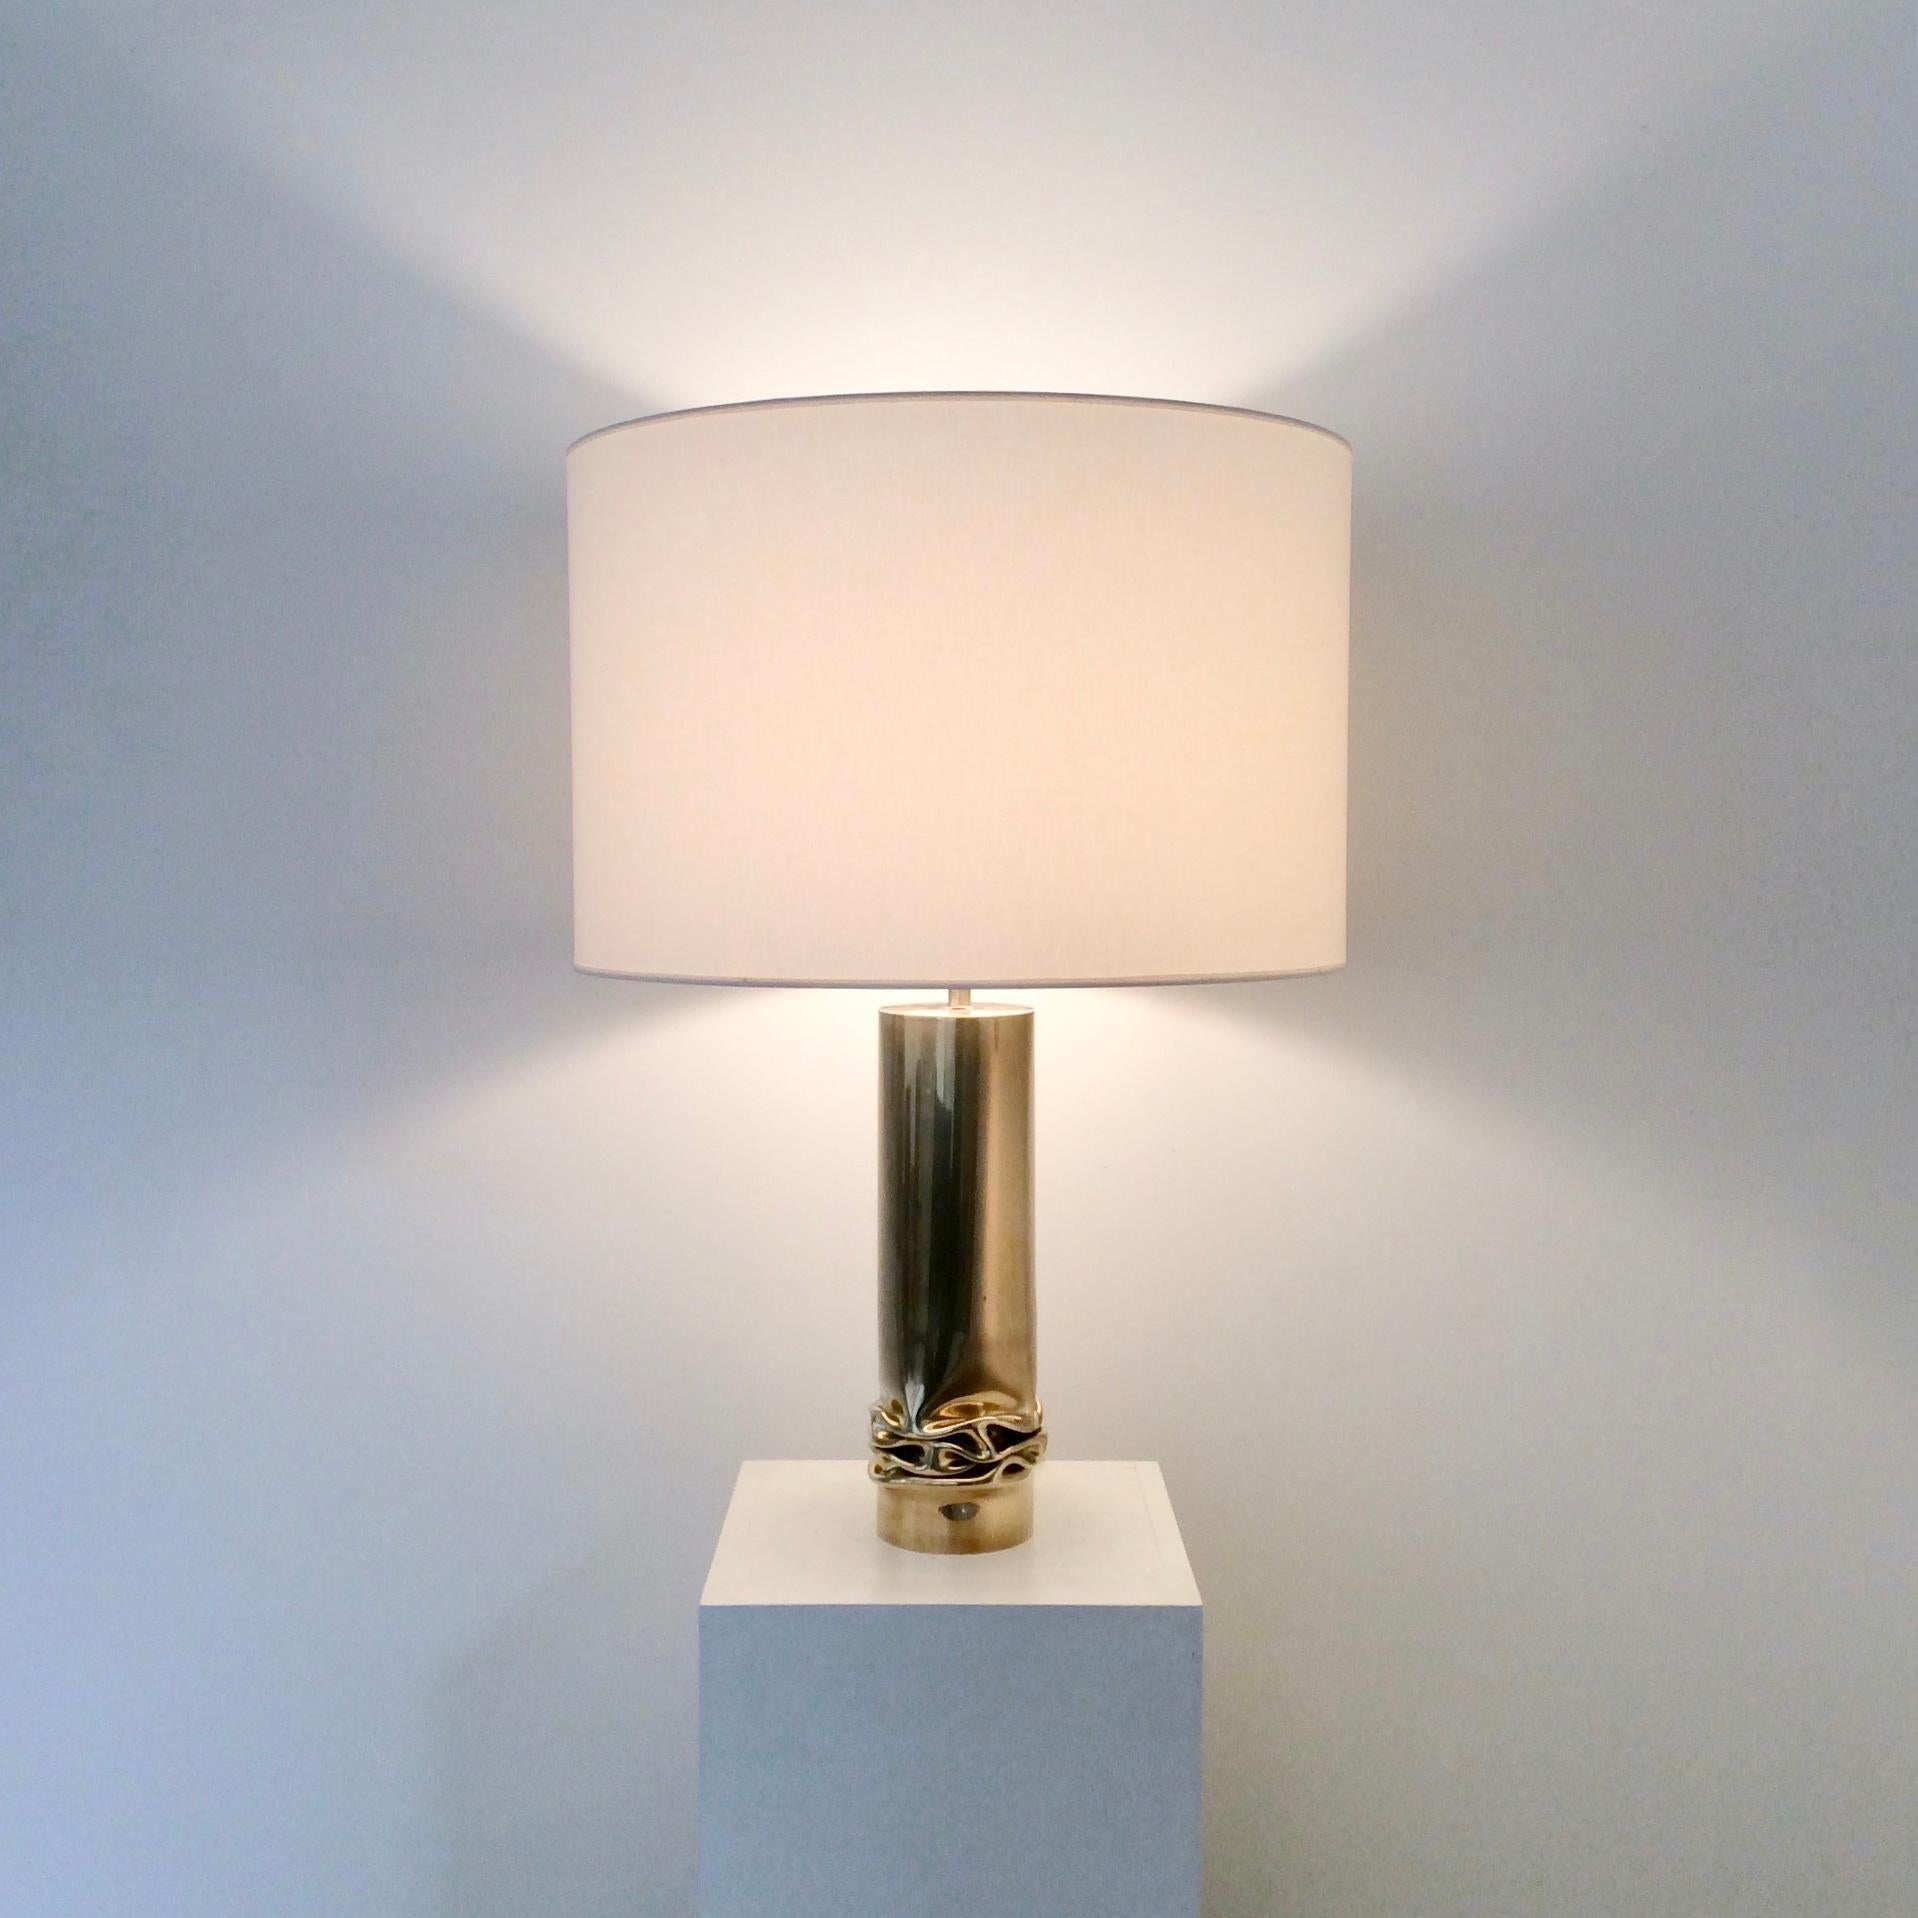 Jacques Moniquet table lamp, Cheret AAM editor, circa 1975, France.
Folded brass sheet and new fabric shade.
One E27 bulb of 60 W.
Rewired.
Marked: Moniquet edition Cheret AAM Paris on the top.
Dimensions: 79 cm H, diameter of the shade: 49